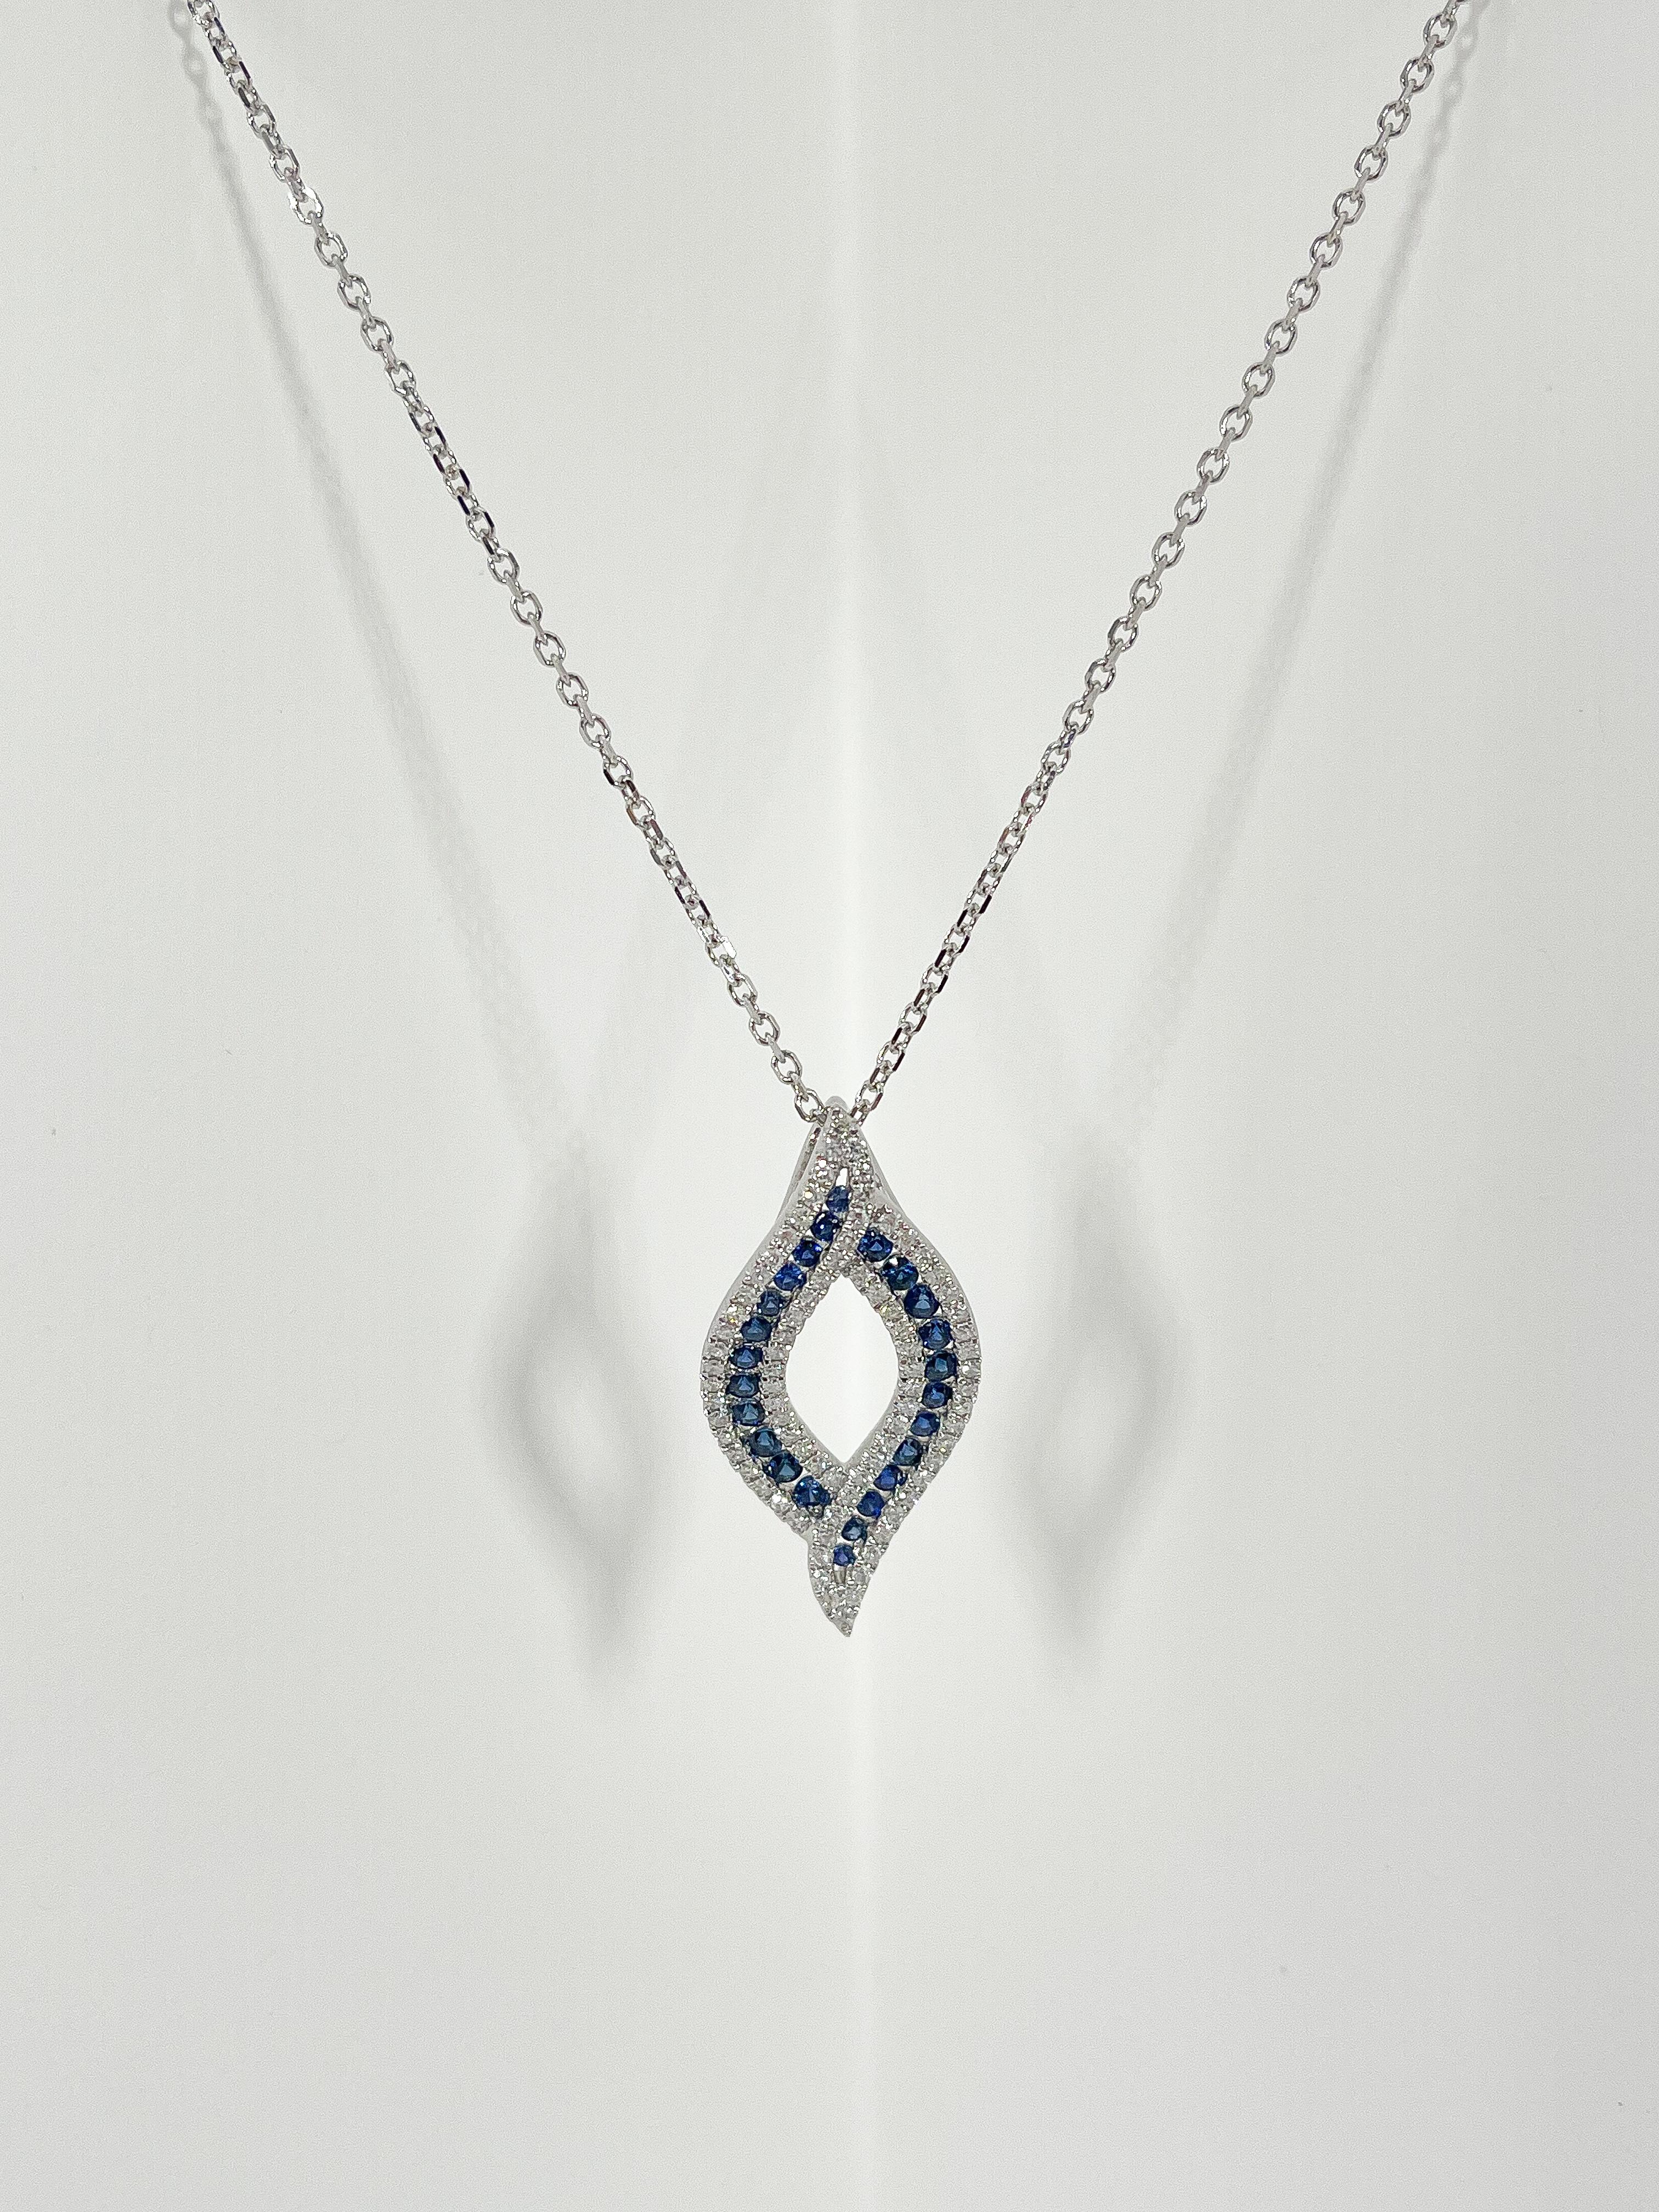 14k white gold .57 CTW diamond and .78 CTW sapphire pendant necklace. The stones in the pendant are all round, the pendant comes on a cable chain, the measurements of the pendant are 32.3 x 15.7 mm, the length of the necklace is 18 inches, and it